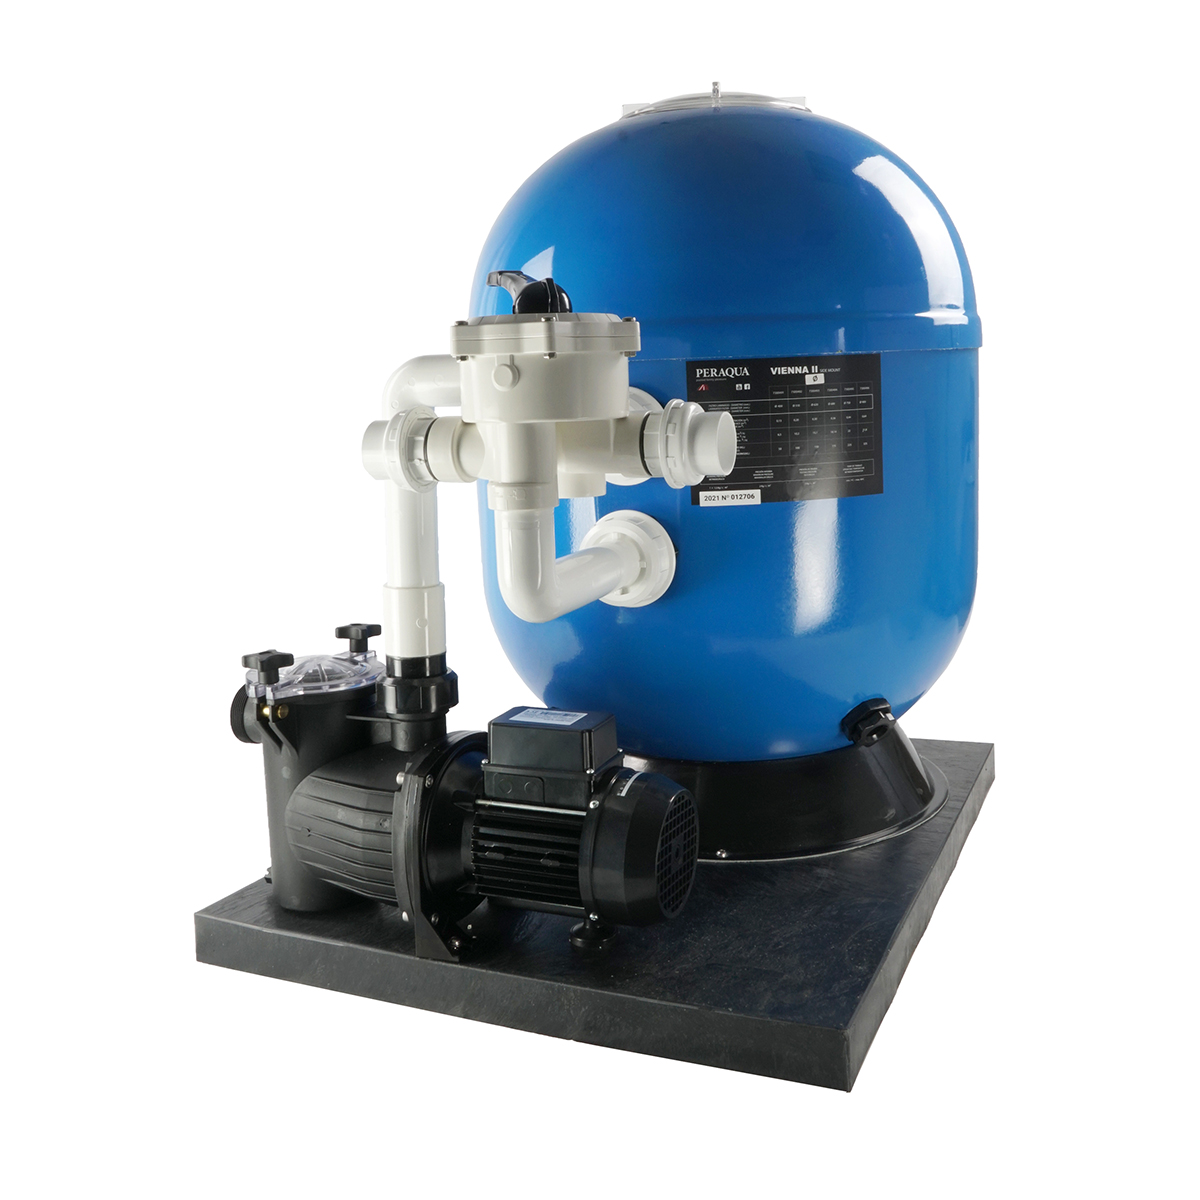 Compact filter set VIENNA II laminated,side mount, blue d620, cover screw type transparent, fixed piping, incl. original Praher 6 way backwash valve SM 1 ½", manual, incl. Smart pump M75 type 0,55 kW, 12m³/h Compact filter set VIENNA II laminated,side mount, blue d620, cover screw type transparent, fixed piping, incl. original Praher 6 way backwash valve SM 1 ½", manual, incl. Smart pump M75 type 0,55 kW, 12m³/h